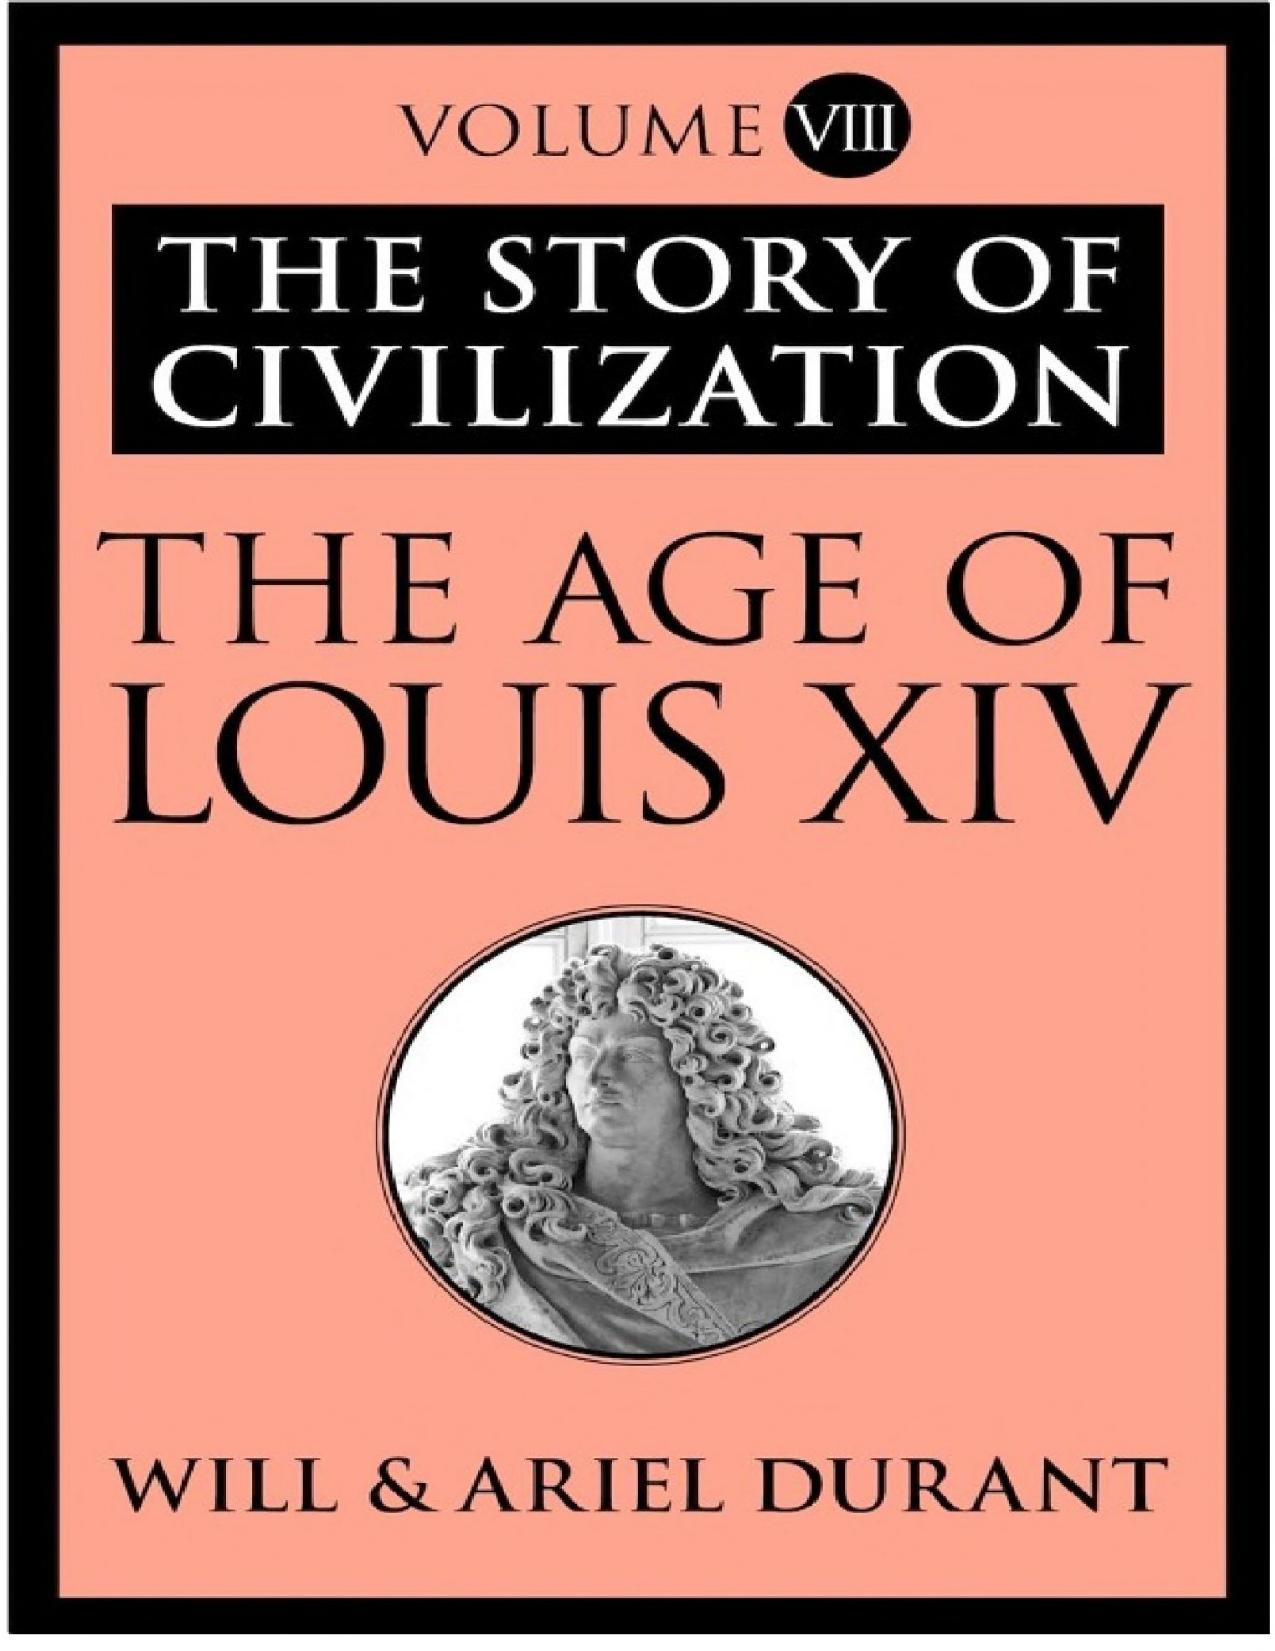 The Age of Louis XIV: The Story of Civilization by Will Durant